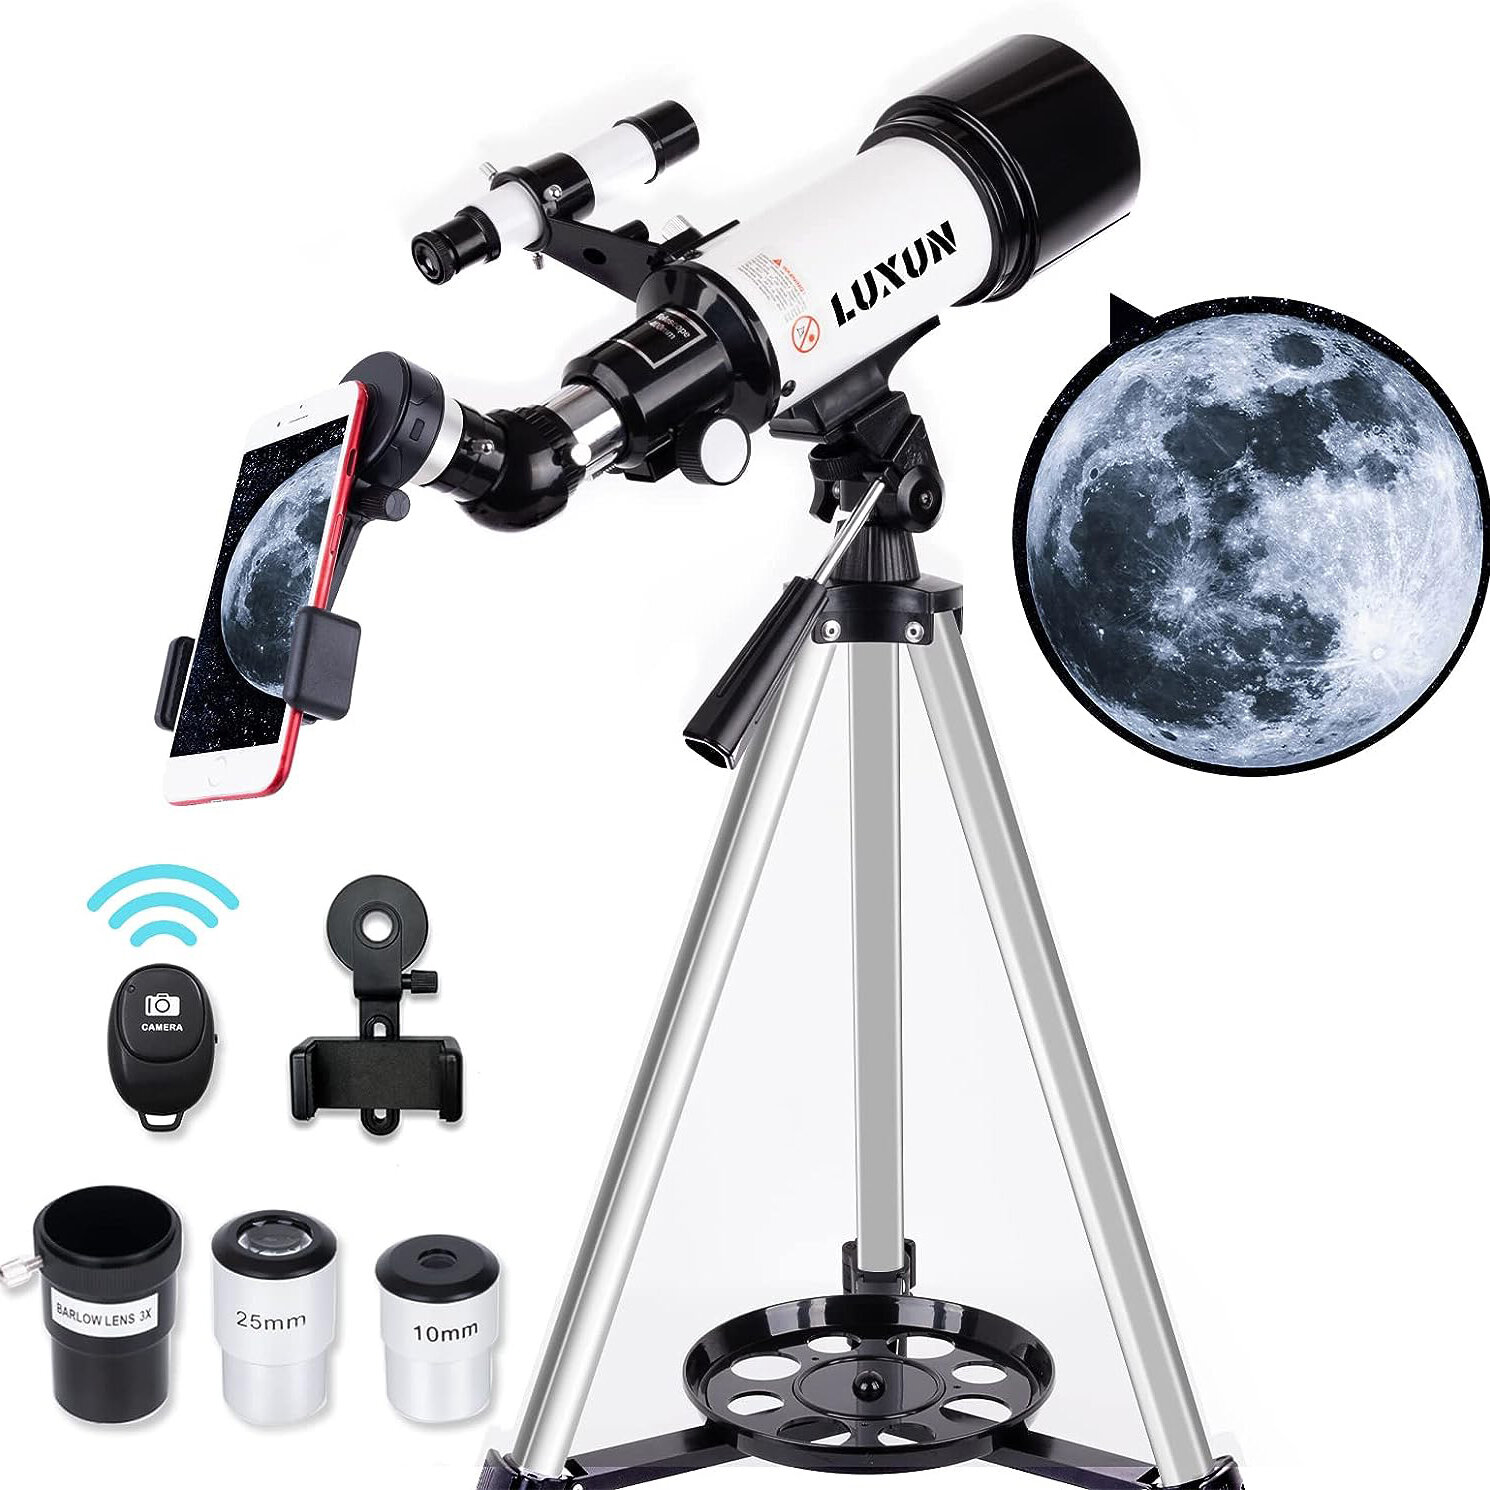 LUXUN Telescope for Astronomy Beginners Kids Adults, 70mm Aperture 400mm Astronomical Refracting Portable Telescope - Travel Telescope with Phone Adapter Wireless bluetooth